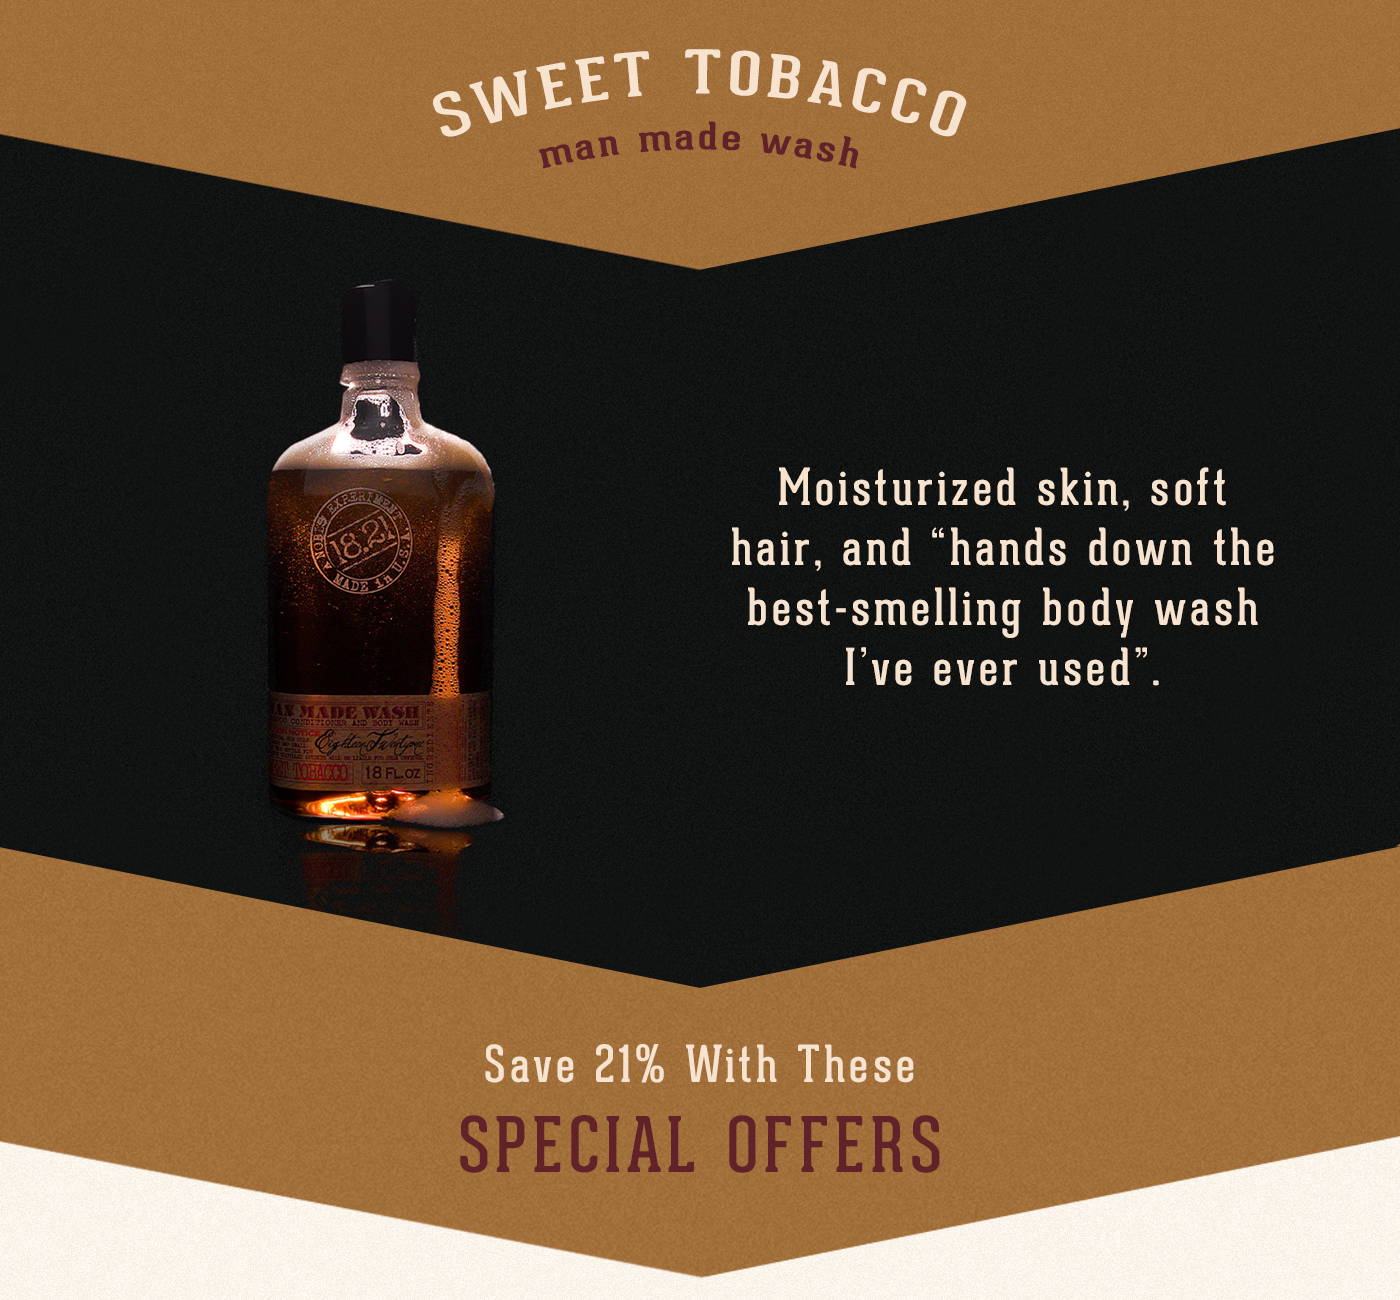 link to sweet tobacco wash product page